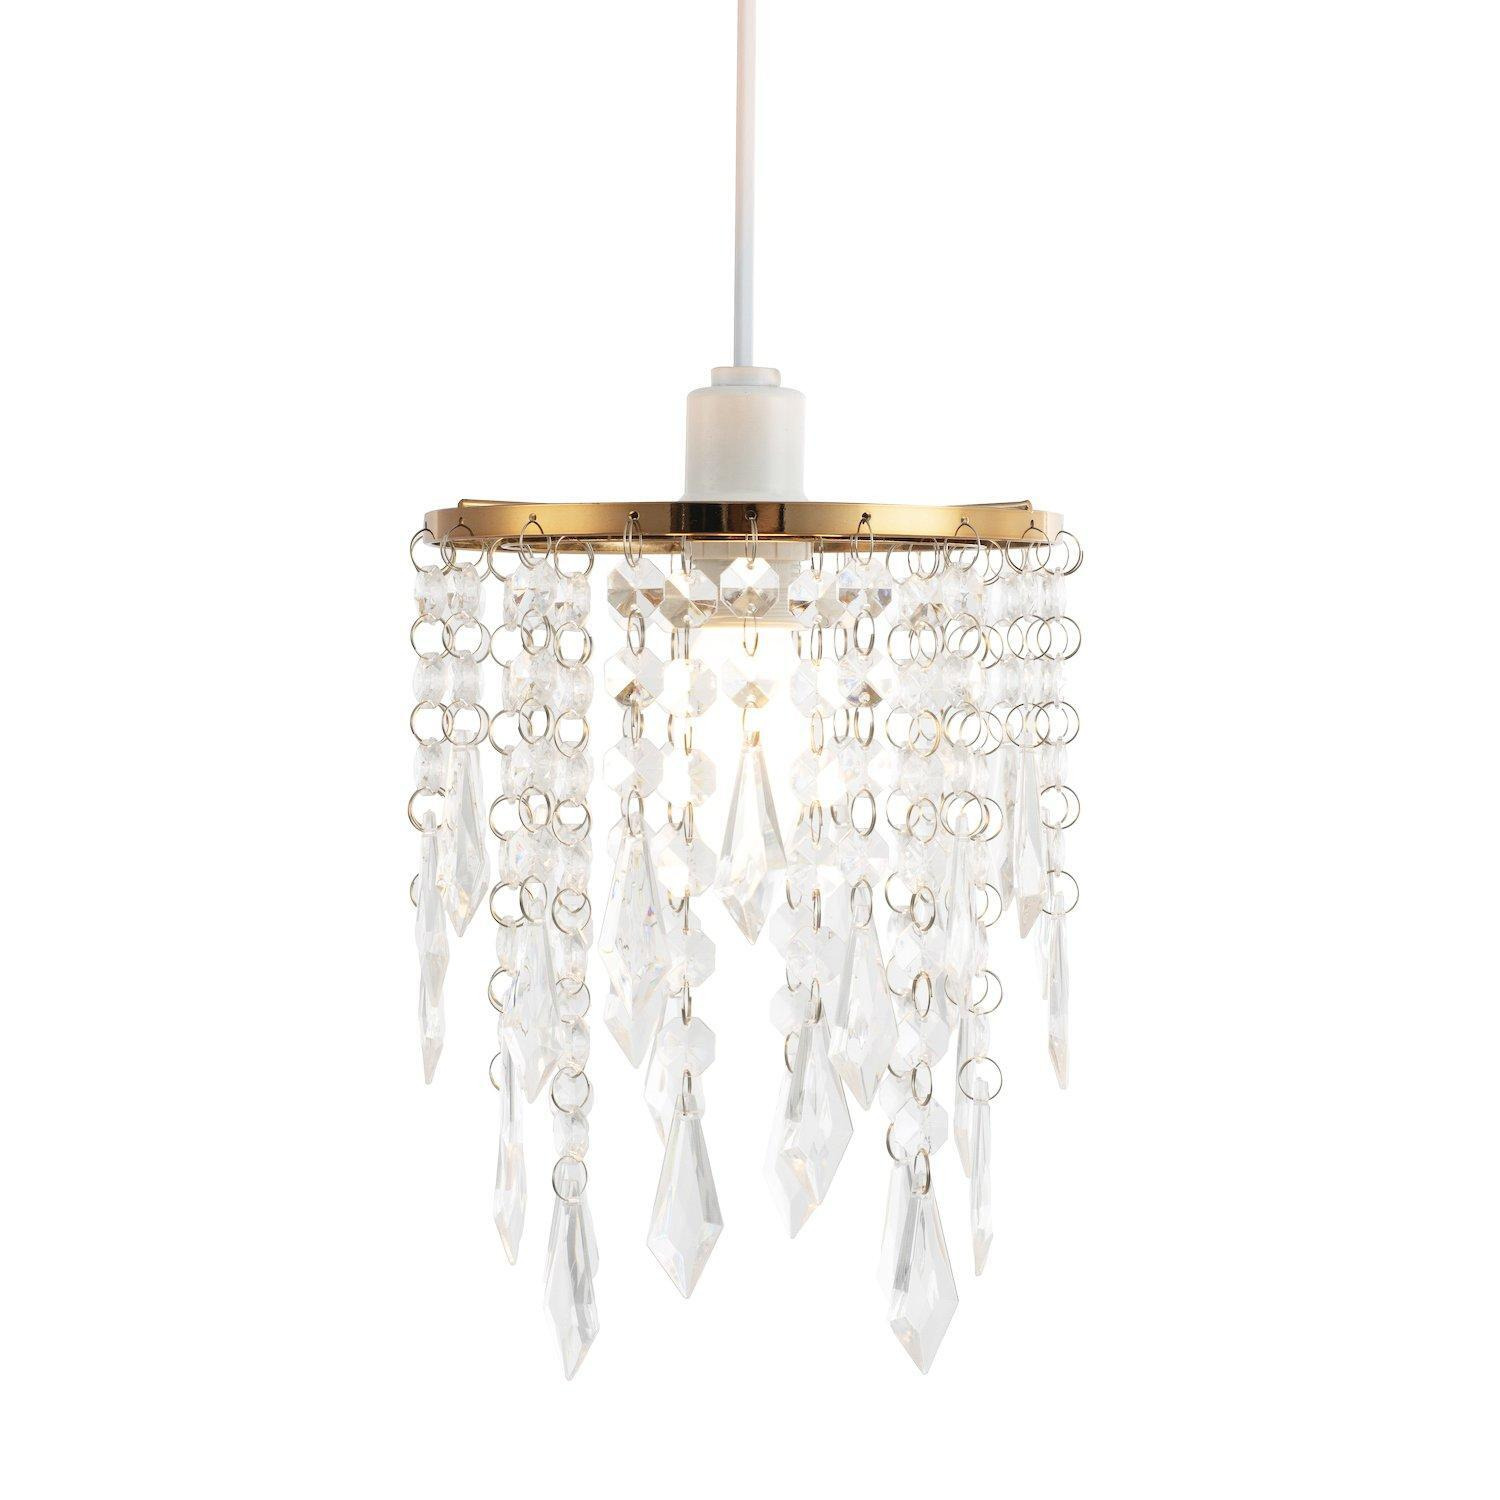 Modern Waterfall Design Pendant Shade with Acrylic Droplets and Beads - image 1